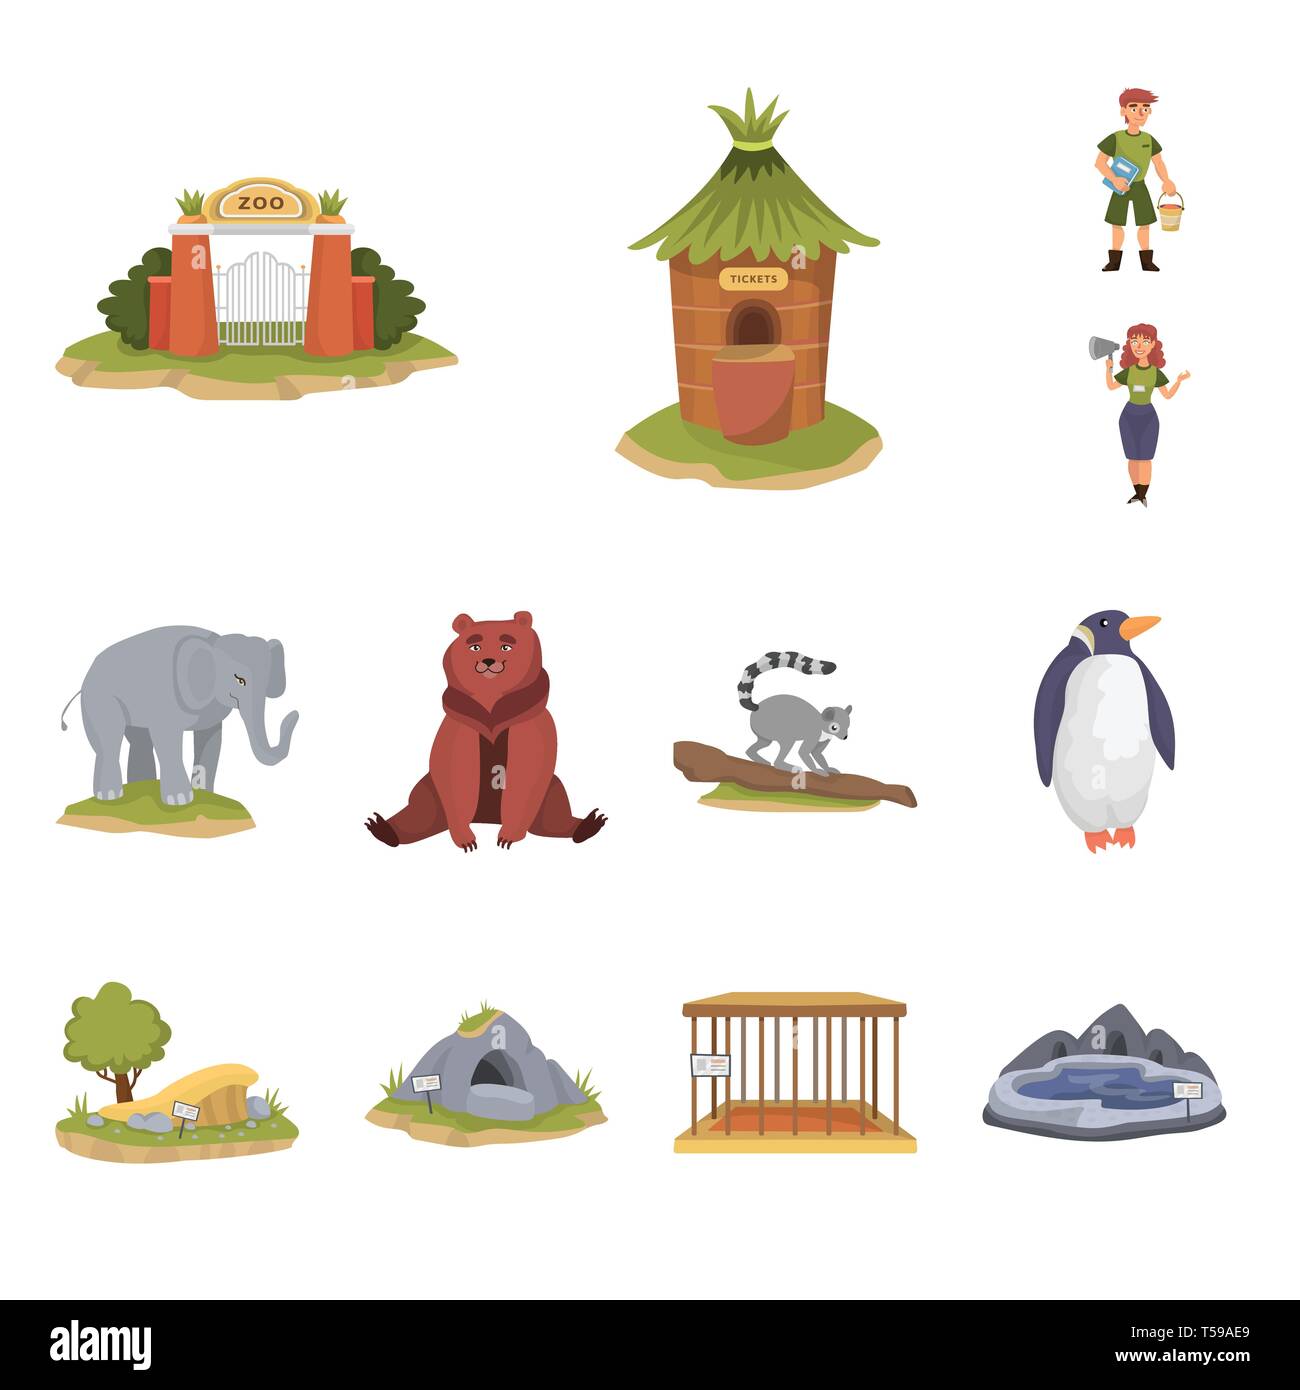 gate,window,zookeeper,elephant,bear,lemur,penguin,trees,cave,cell,lake,arch,counter,man,woman,cute,brown,monkey,white,sand,empty,pool,brick,service,worker,megaphone,nursery,Africa,zoo,park,safari,animal,forest,nature,fun,flora,fauna,entertainment,set,vector,icon,illustration,isolated,collection,design,element,graphic,sign,cartoon,color Vector Vectors , Stock Vector